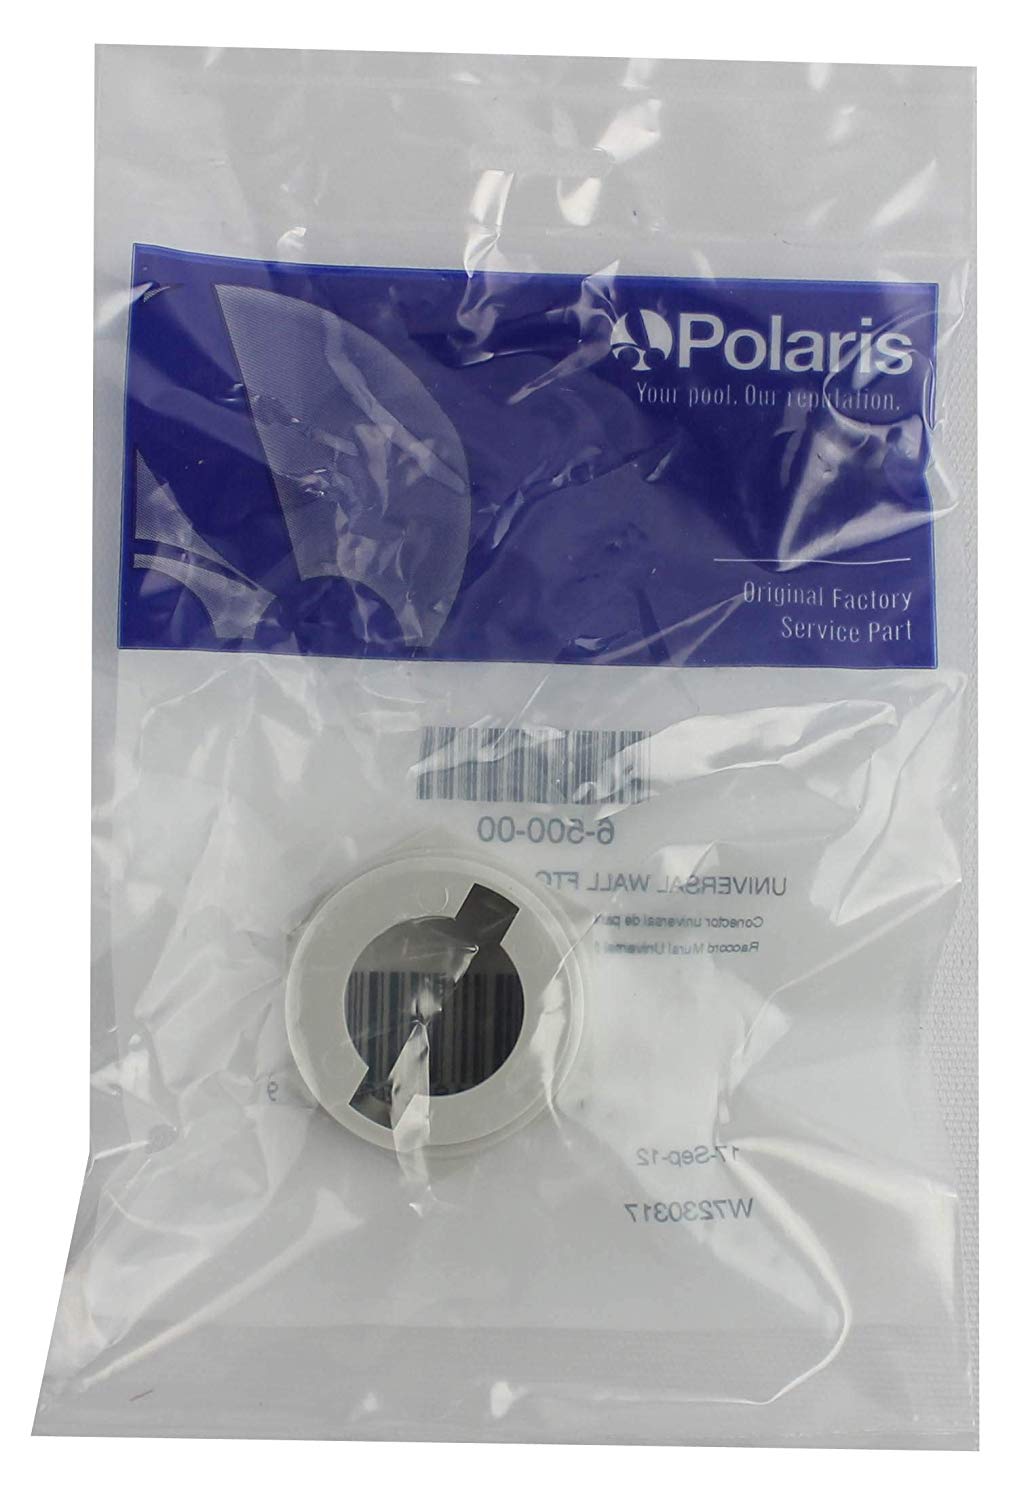 view of item in package - Polaris Vac-Sweep 380 / 360 / 280 / 180 / 165 / 65 / Turbo Turtle and 280 TankTrax Pressure Cleaner Universal Wall Fitting (UWF) - ePoolSupply